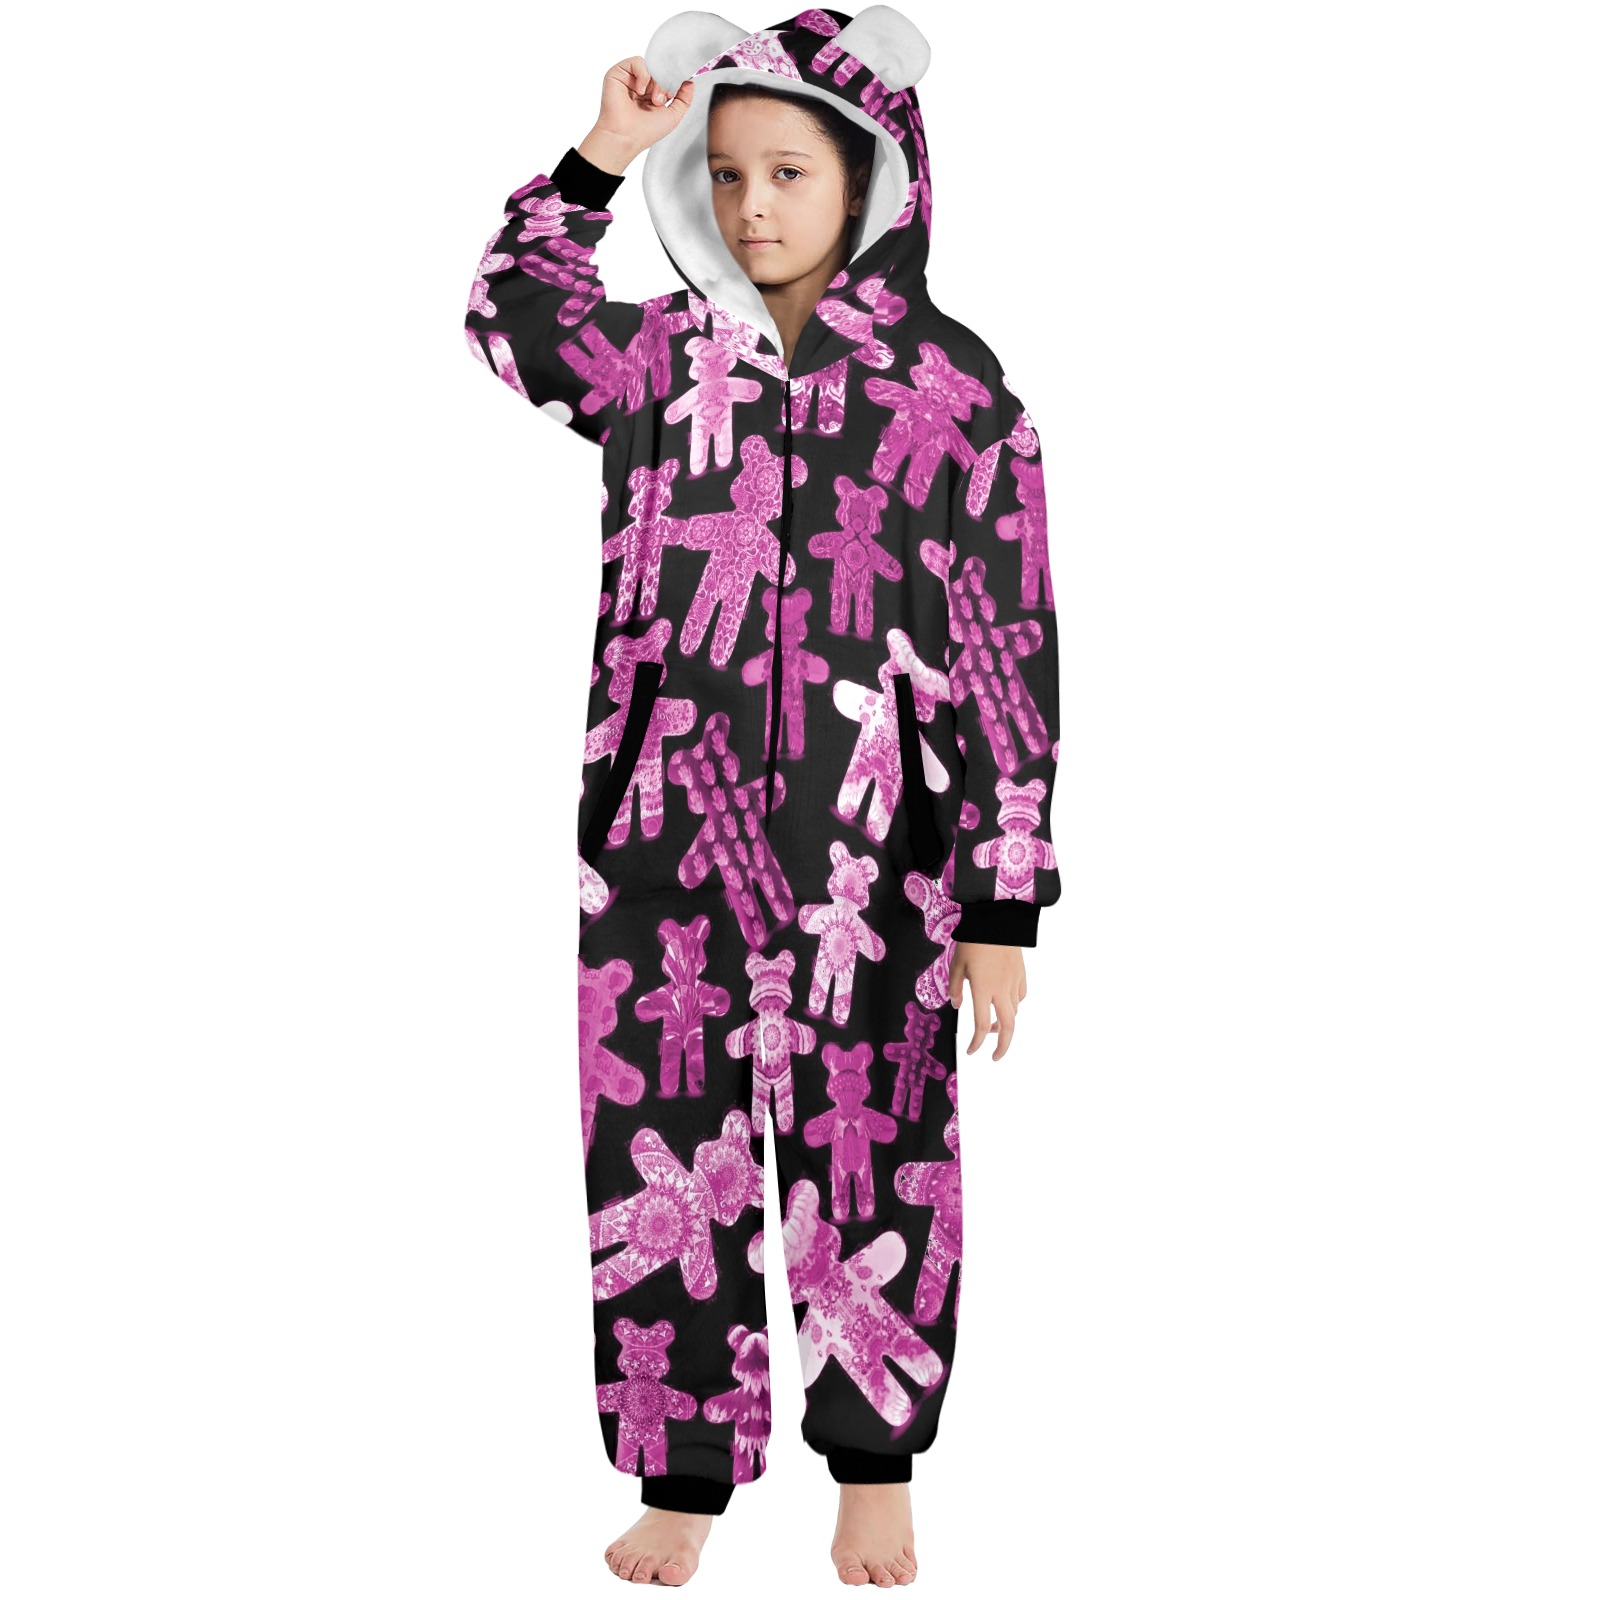 teddy bear assortiment 7 One-Piece Zip Up Hooded Pajamas for Big Kids